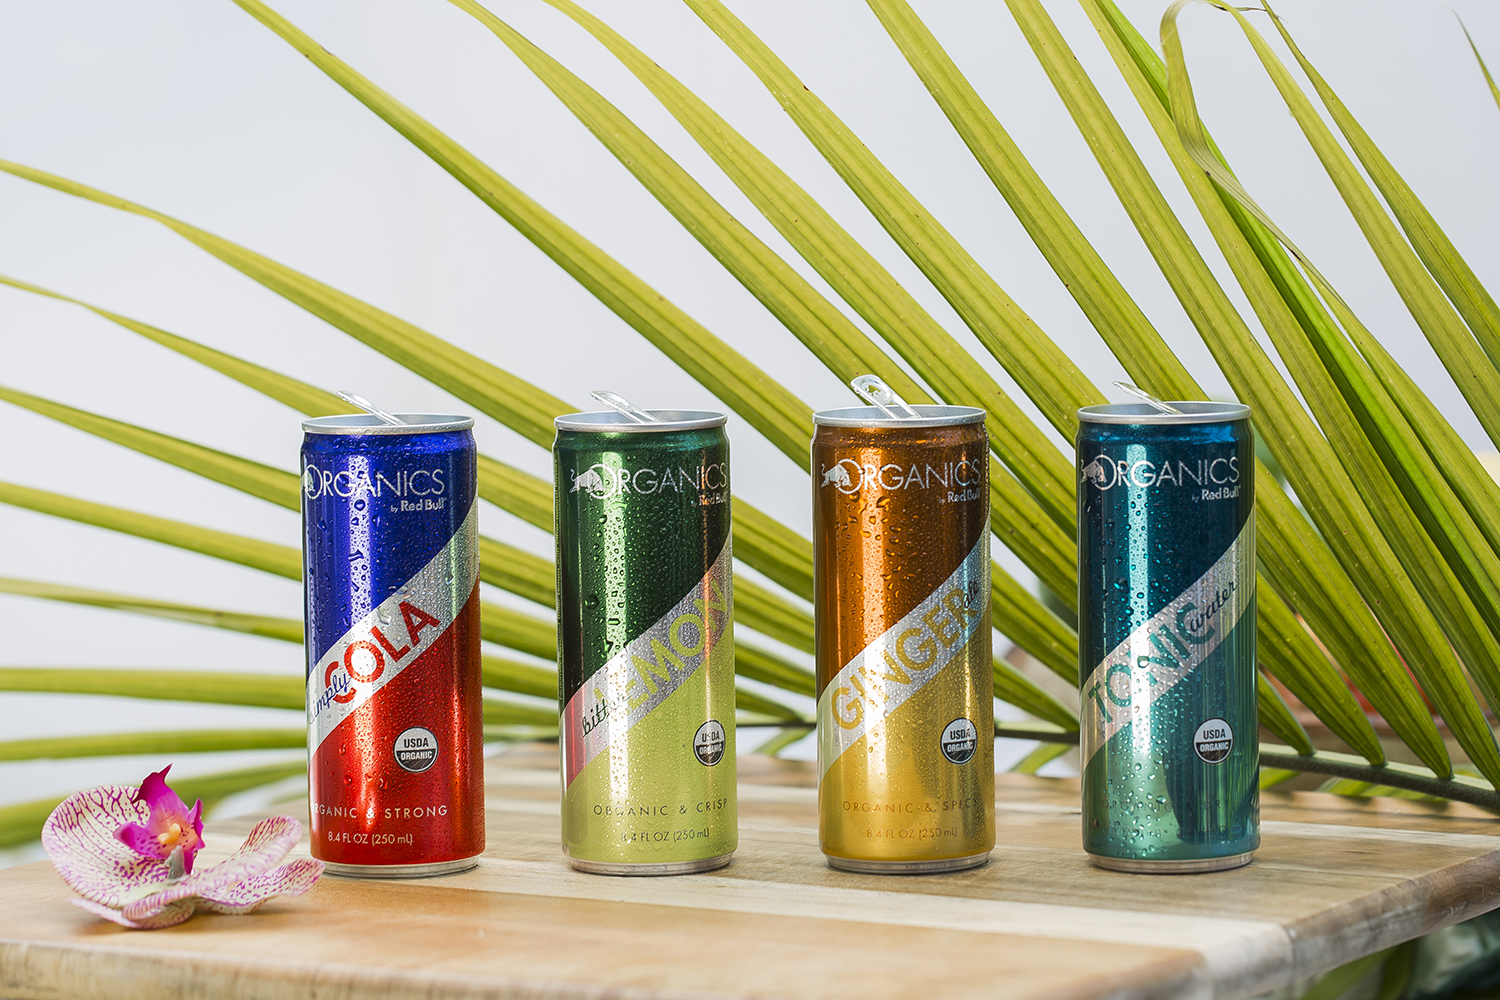 Red Bull Gets Back into the Soda Game with Red Bull Organics